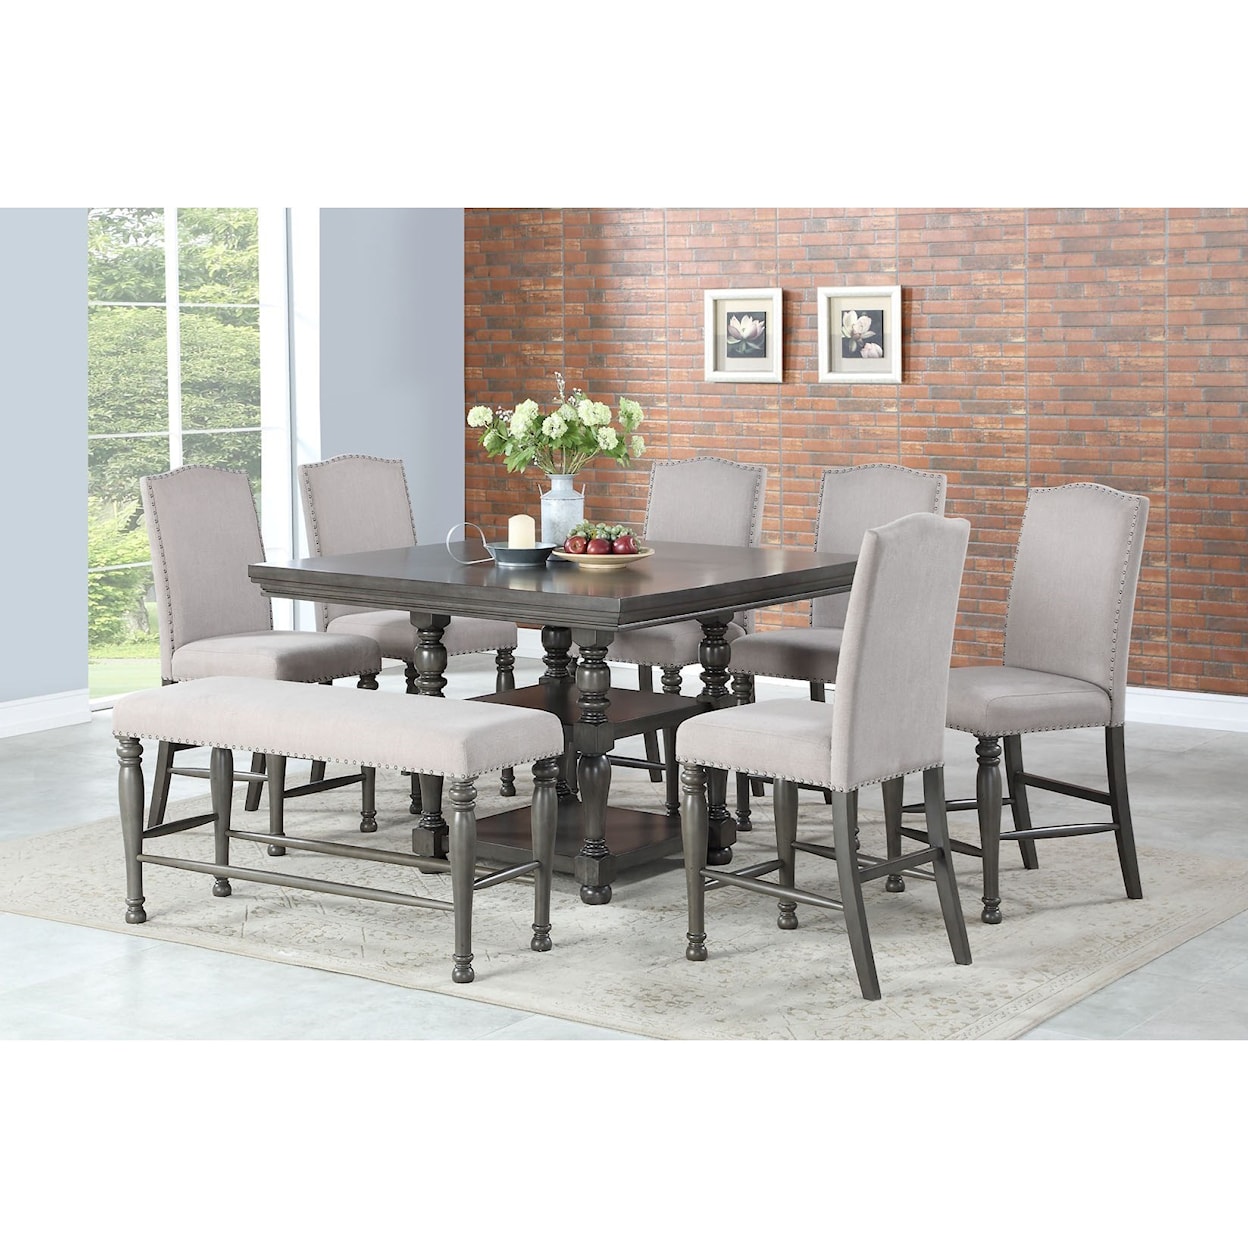 Prime Caswell 8 Pc Counter Dining Set w/ Bench